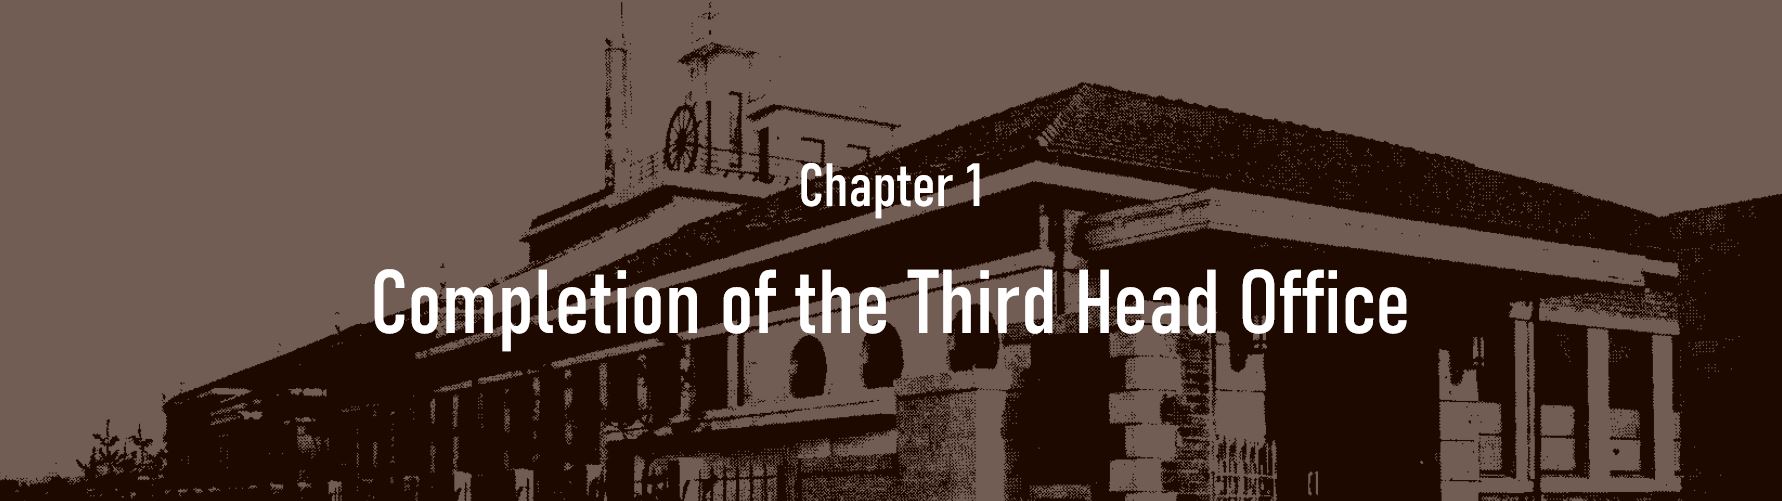 Chapter 1. Completion of the Third Head Office